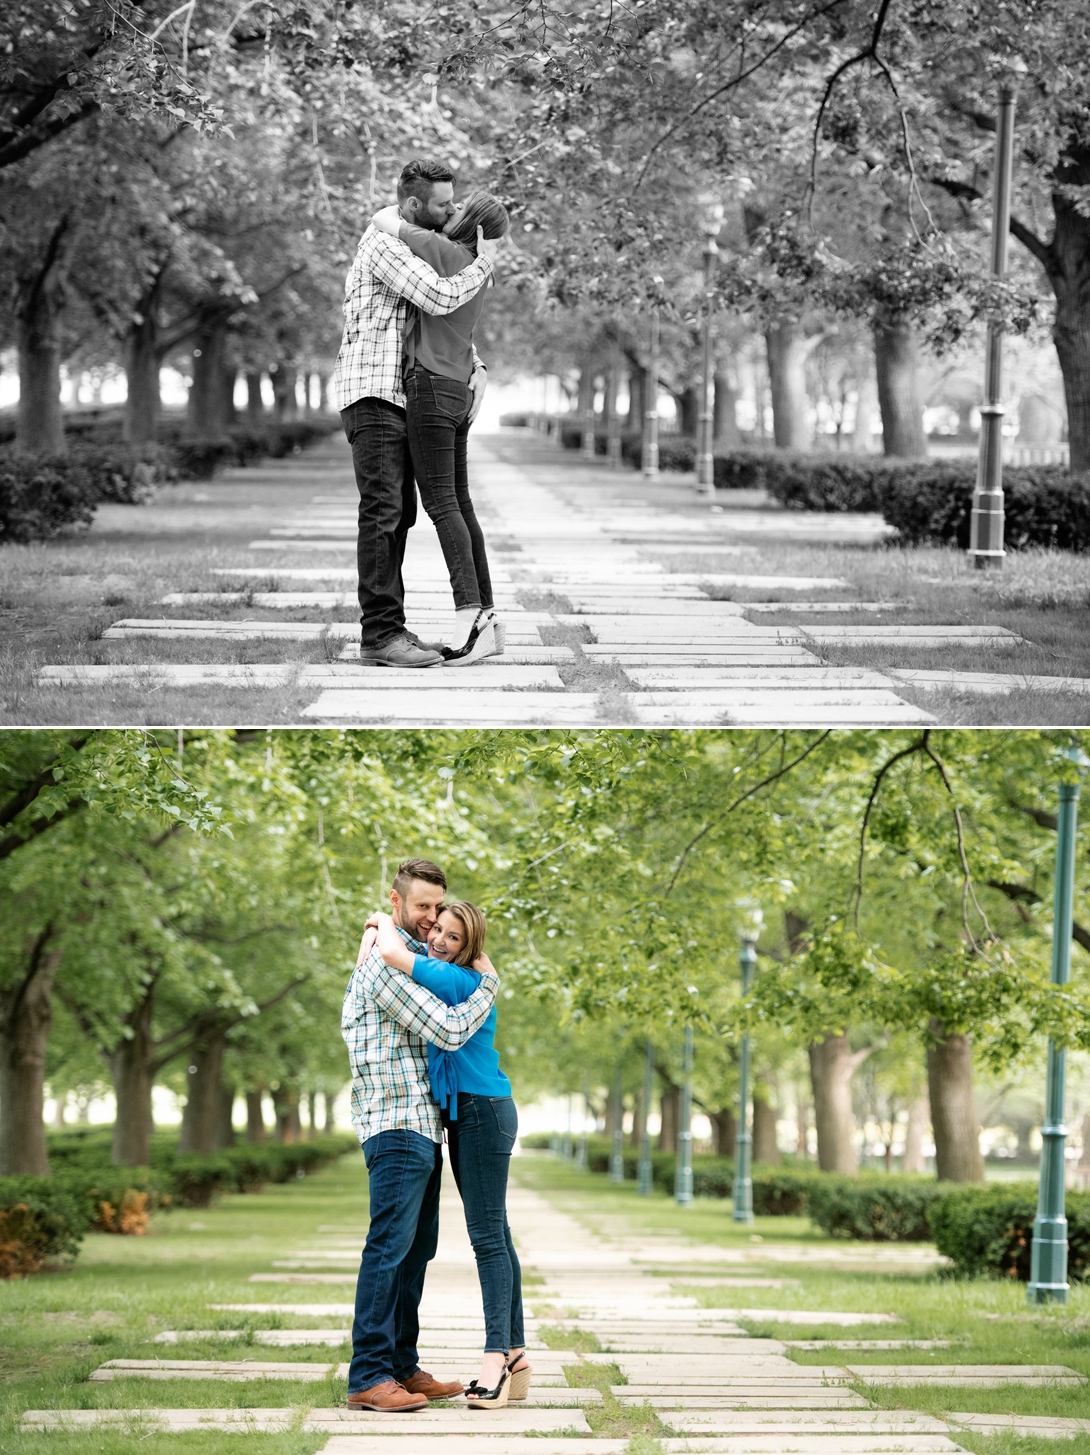 nelson-atkins spring engagement session